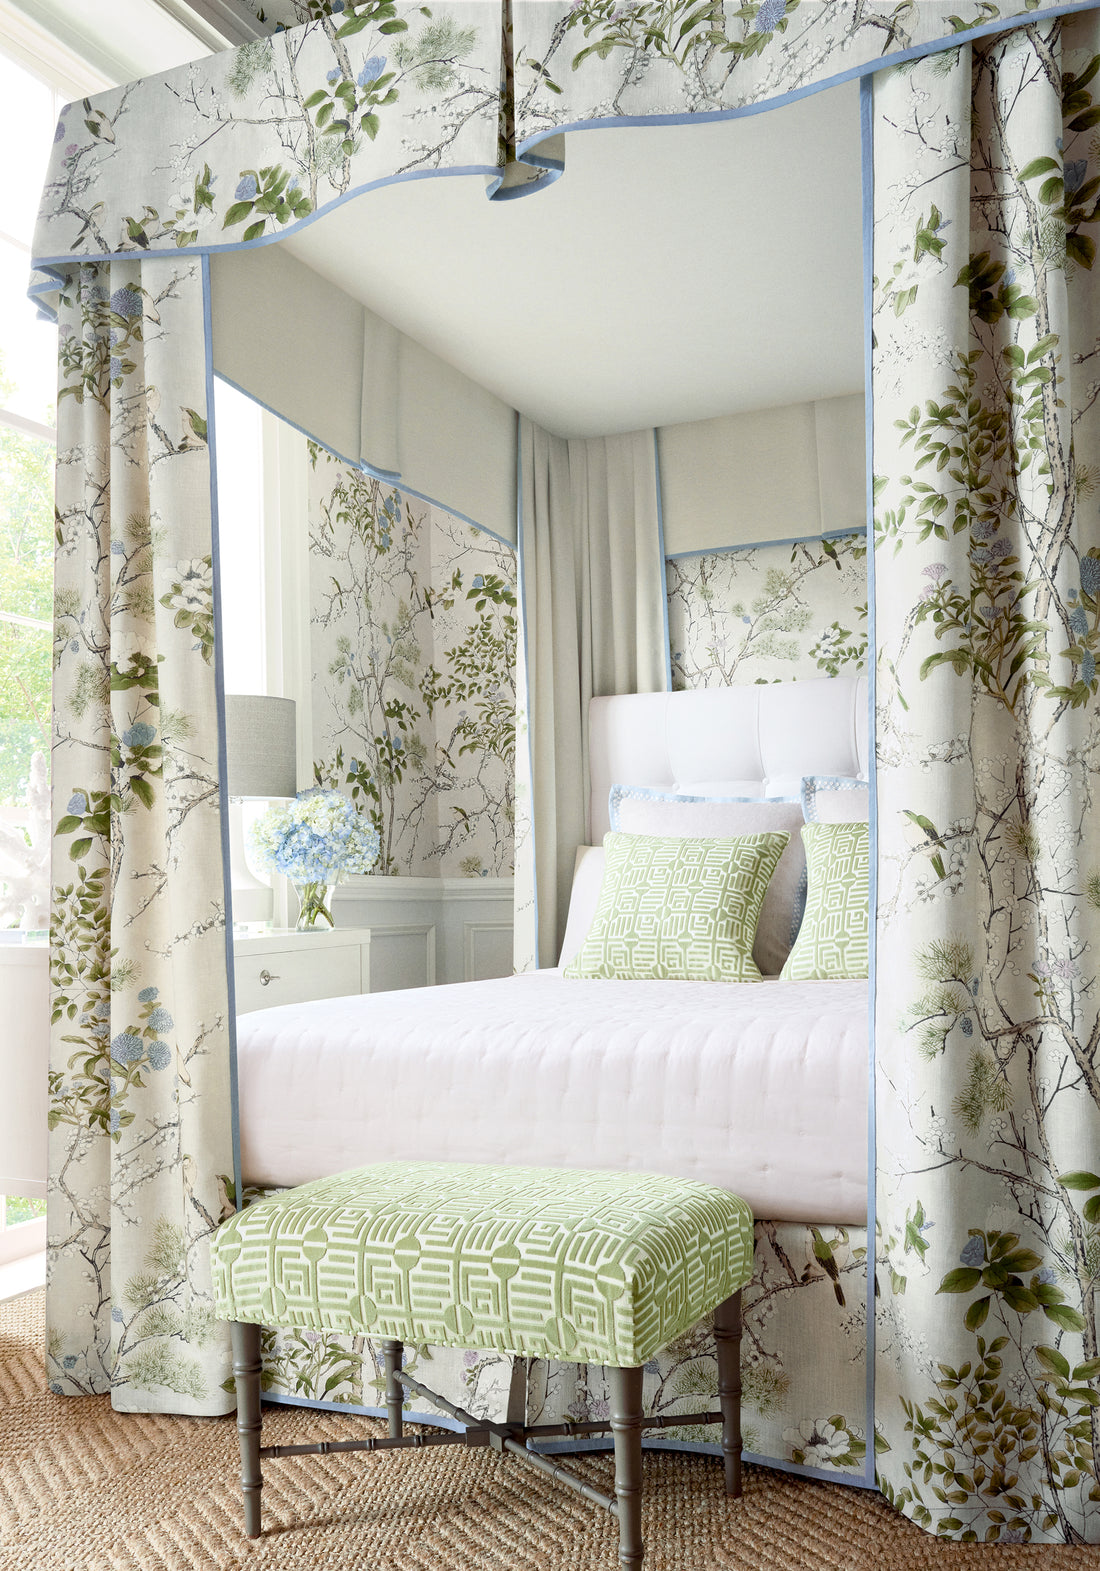 Bed canopy in Thibaut Katsura printed fabric in Cream and Lavender color